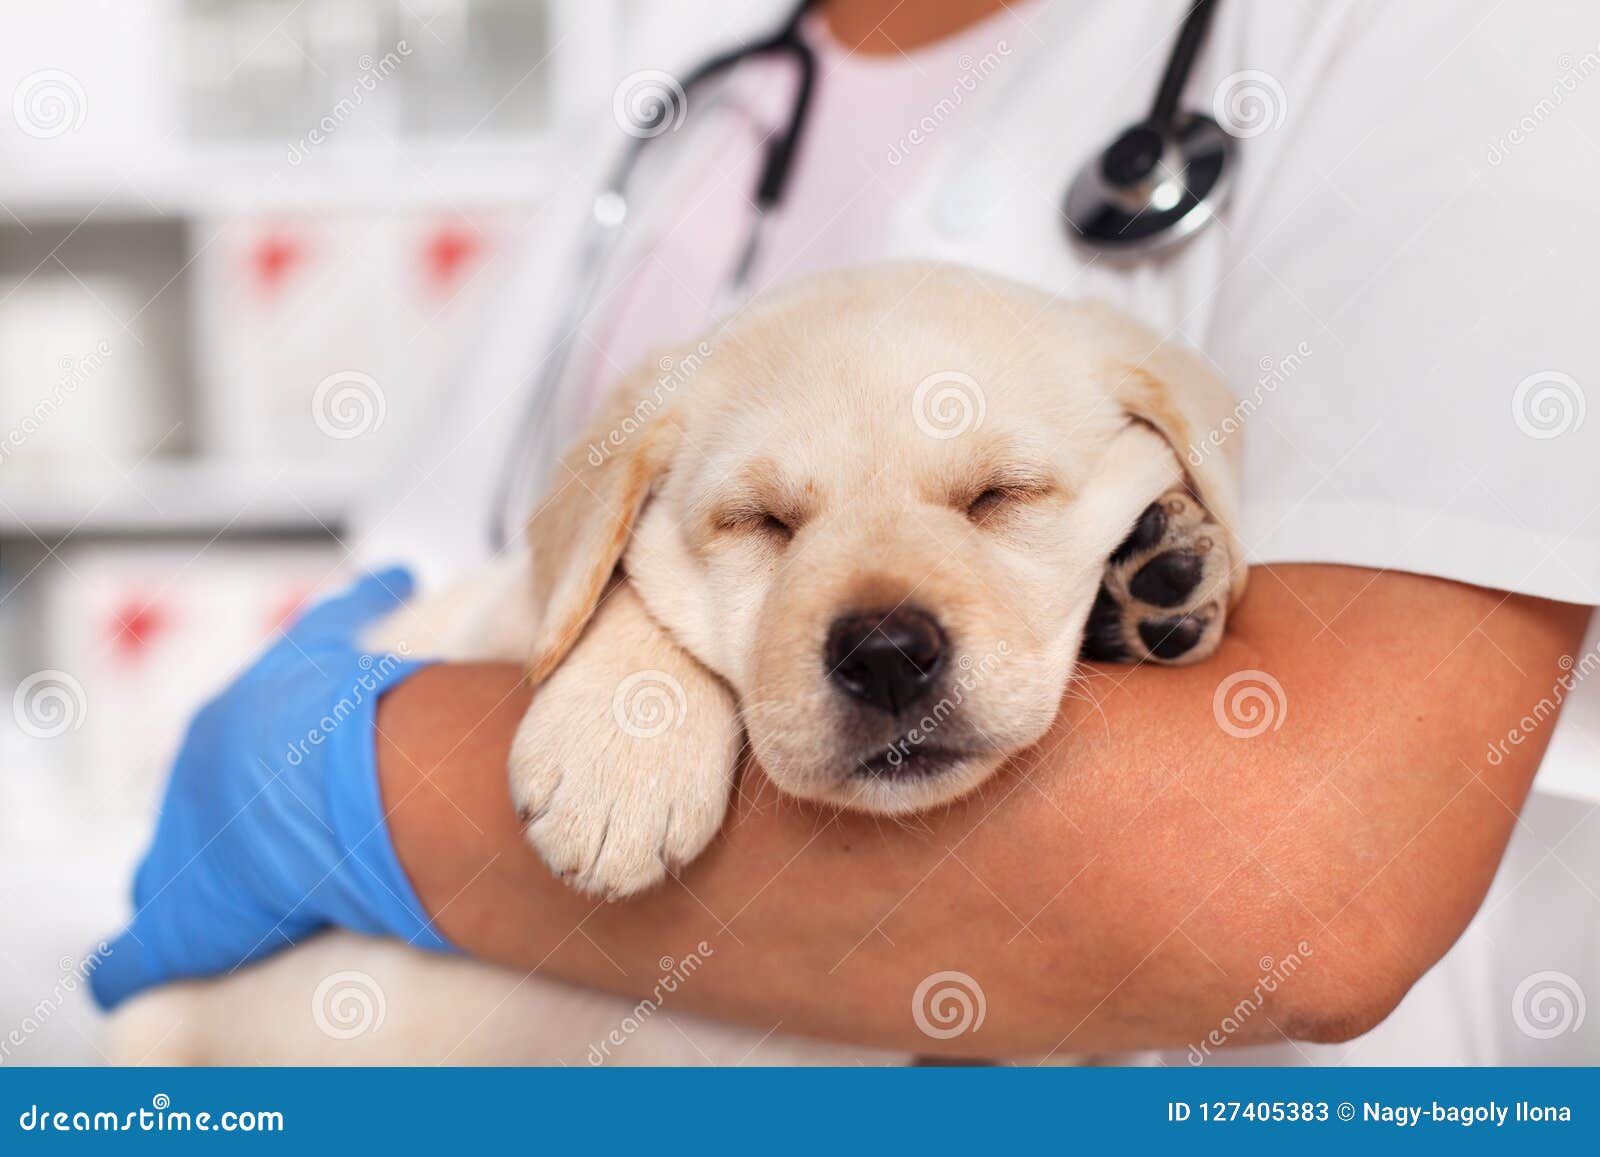 exhausted labrador puppy dog sleeping in the arms of veterinary